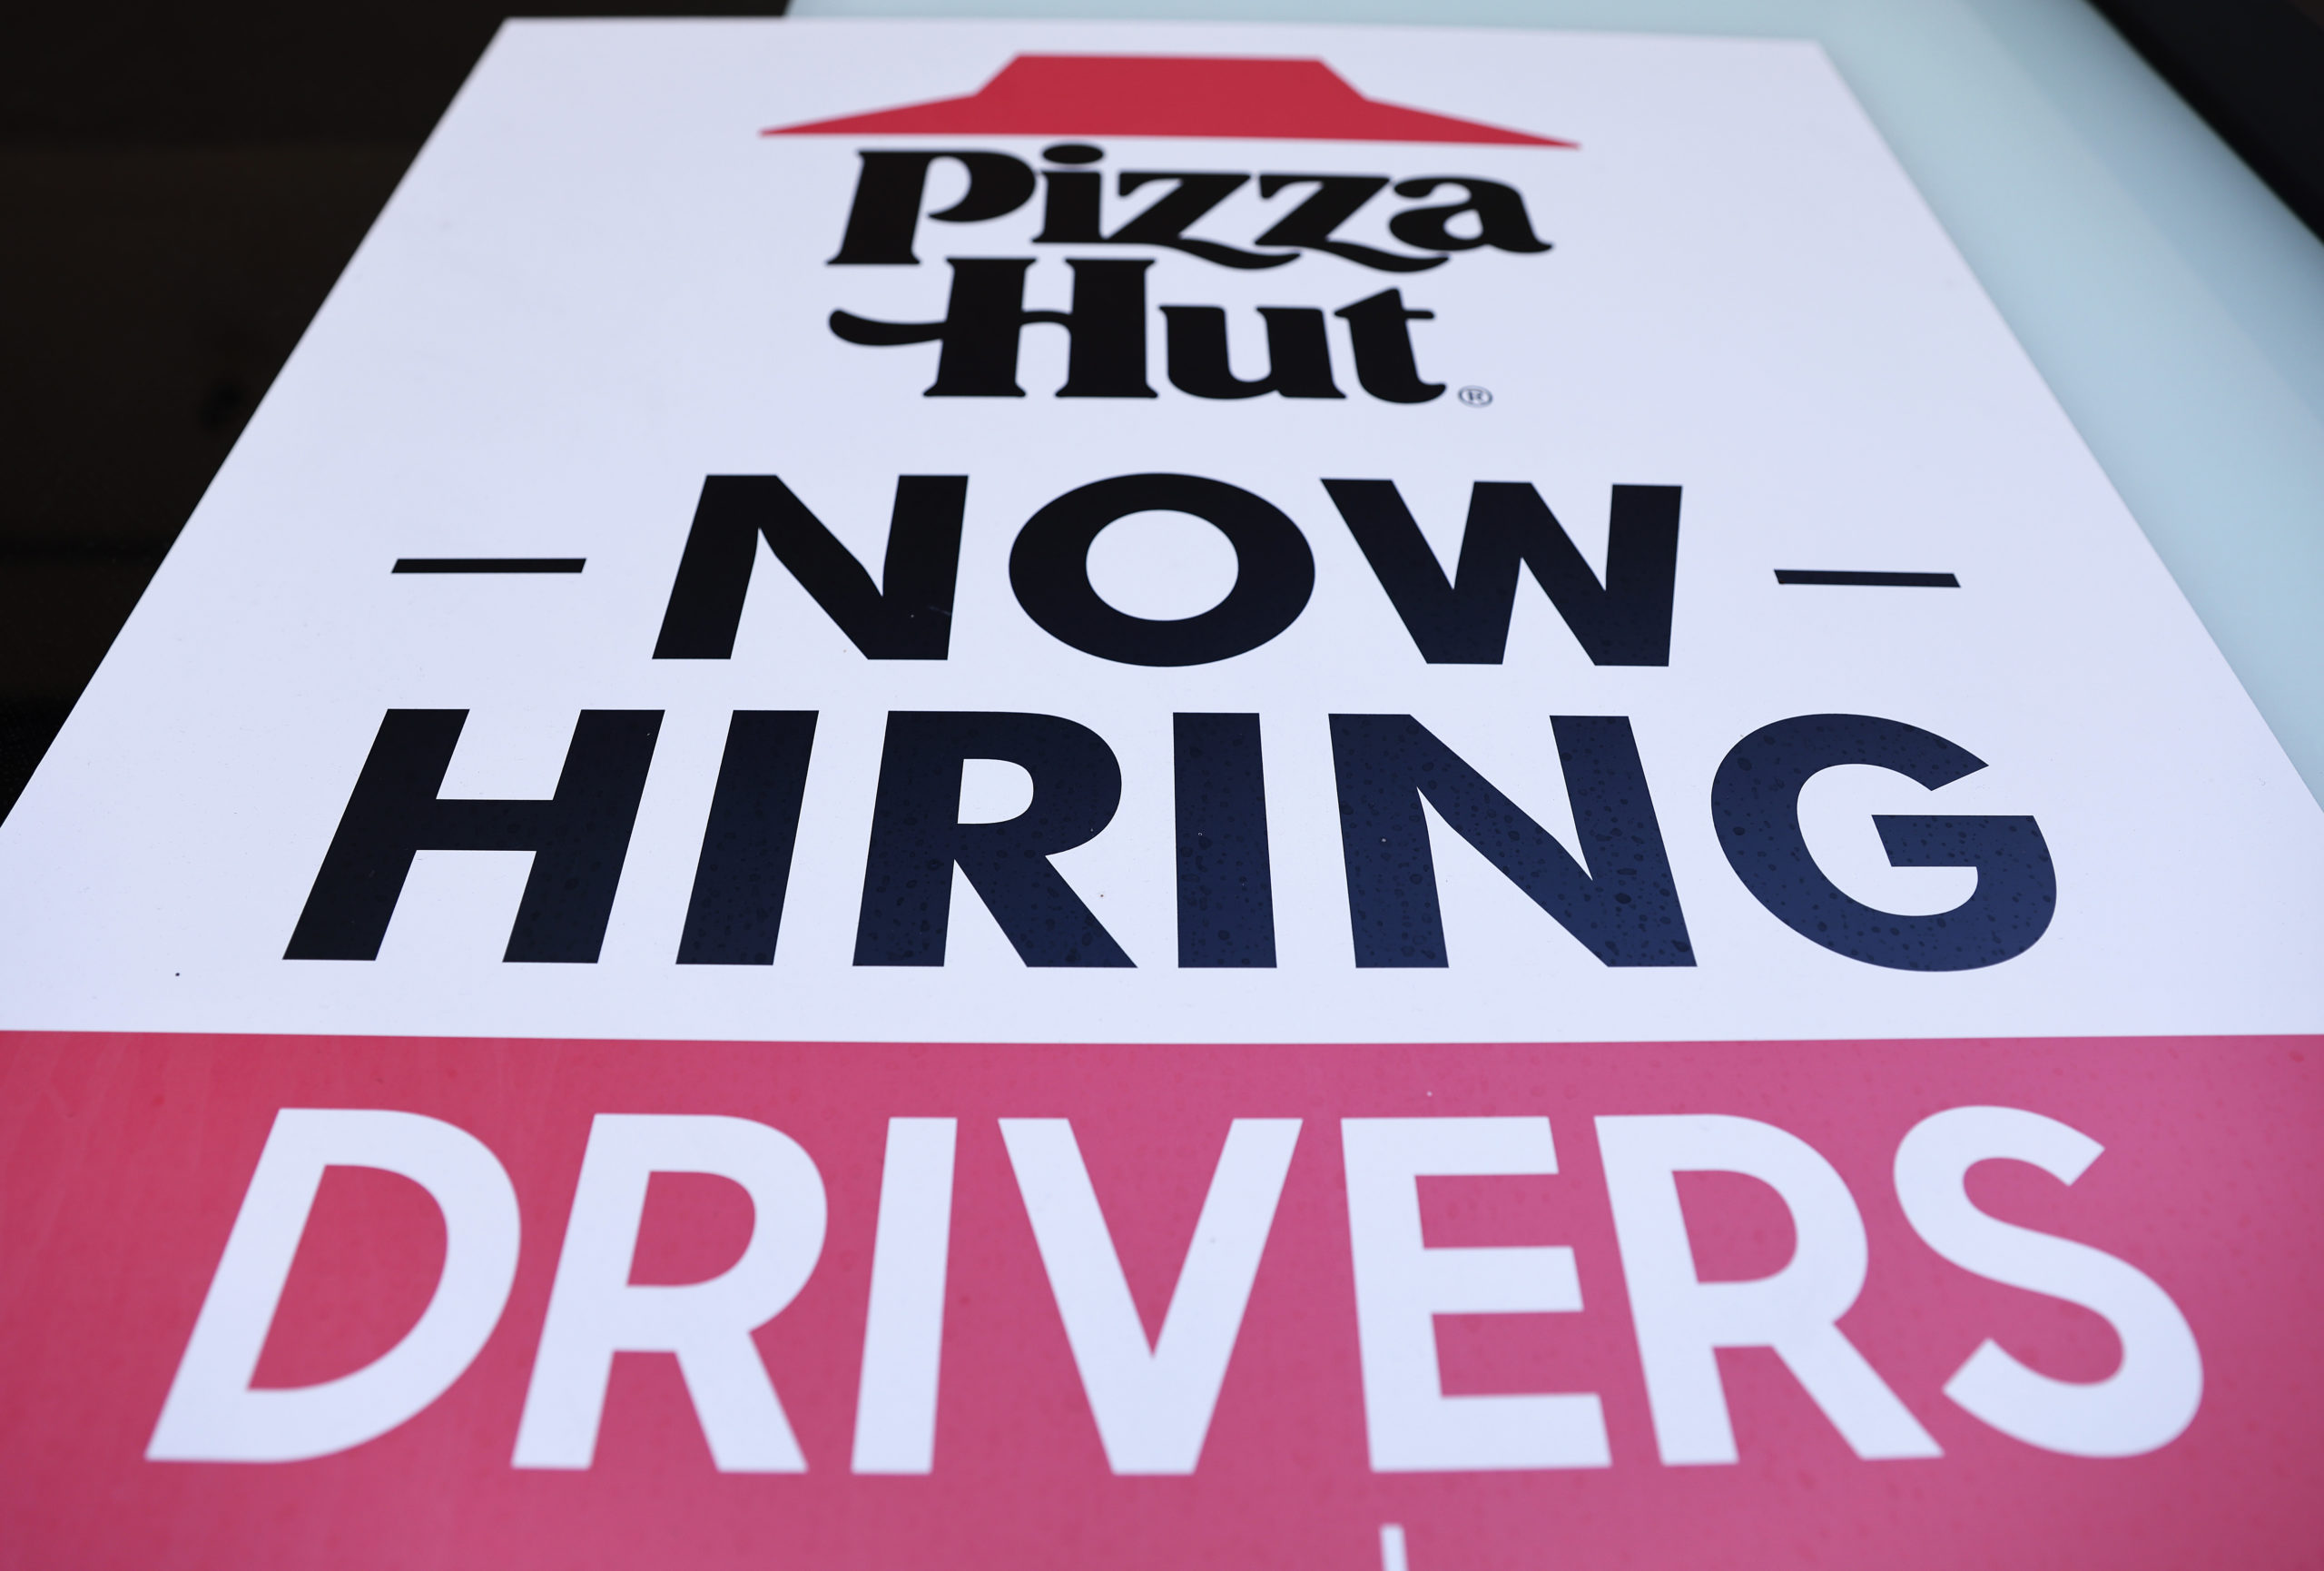 A 'Now Hiring' sign is posted at a Pizza Hut on Aug. 6, 2021 in Los Angeles, California. (Mario Tama/Getty Images)